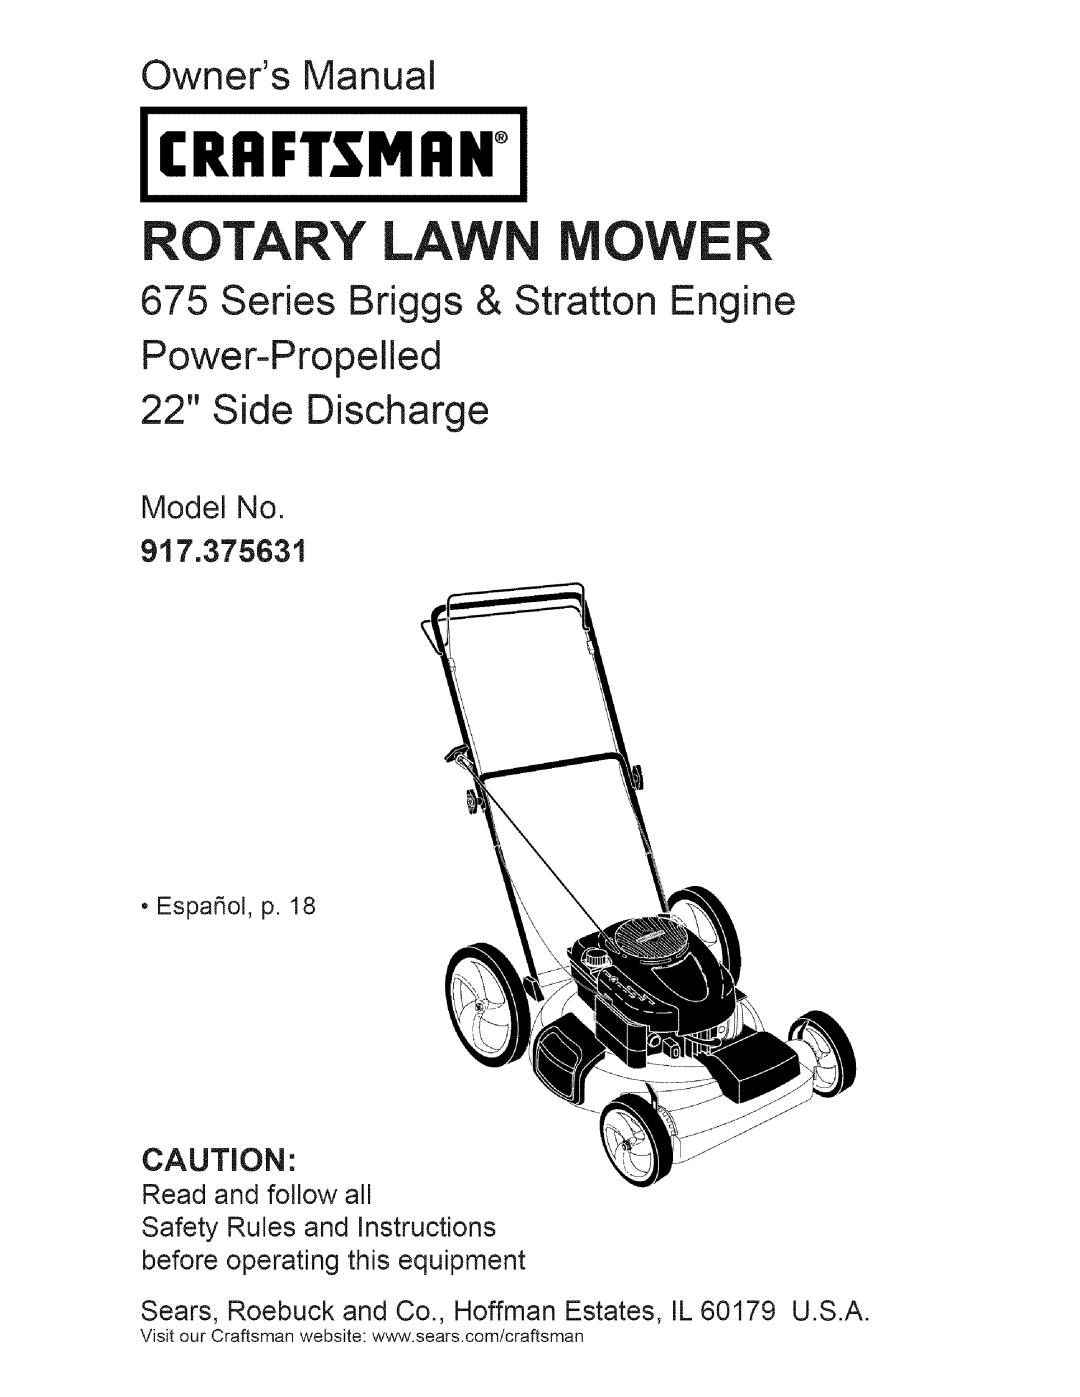 Craftsman owner manual Model No 917.375631, Craftsman, Rotary Mower, Owners Manual, Series Briggs & Stratton Engine 